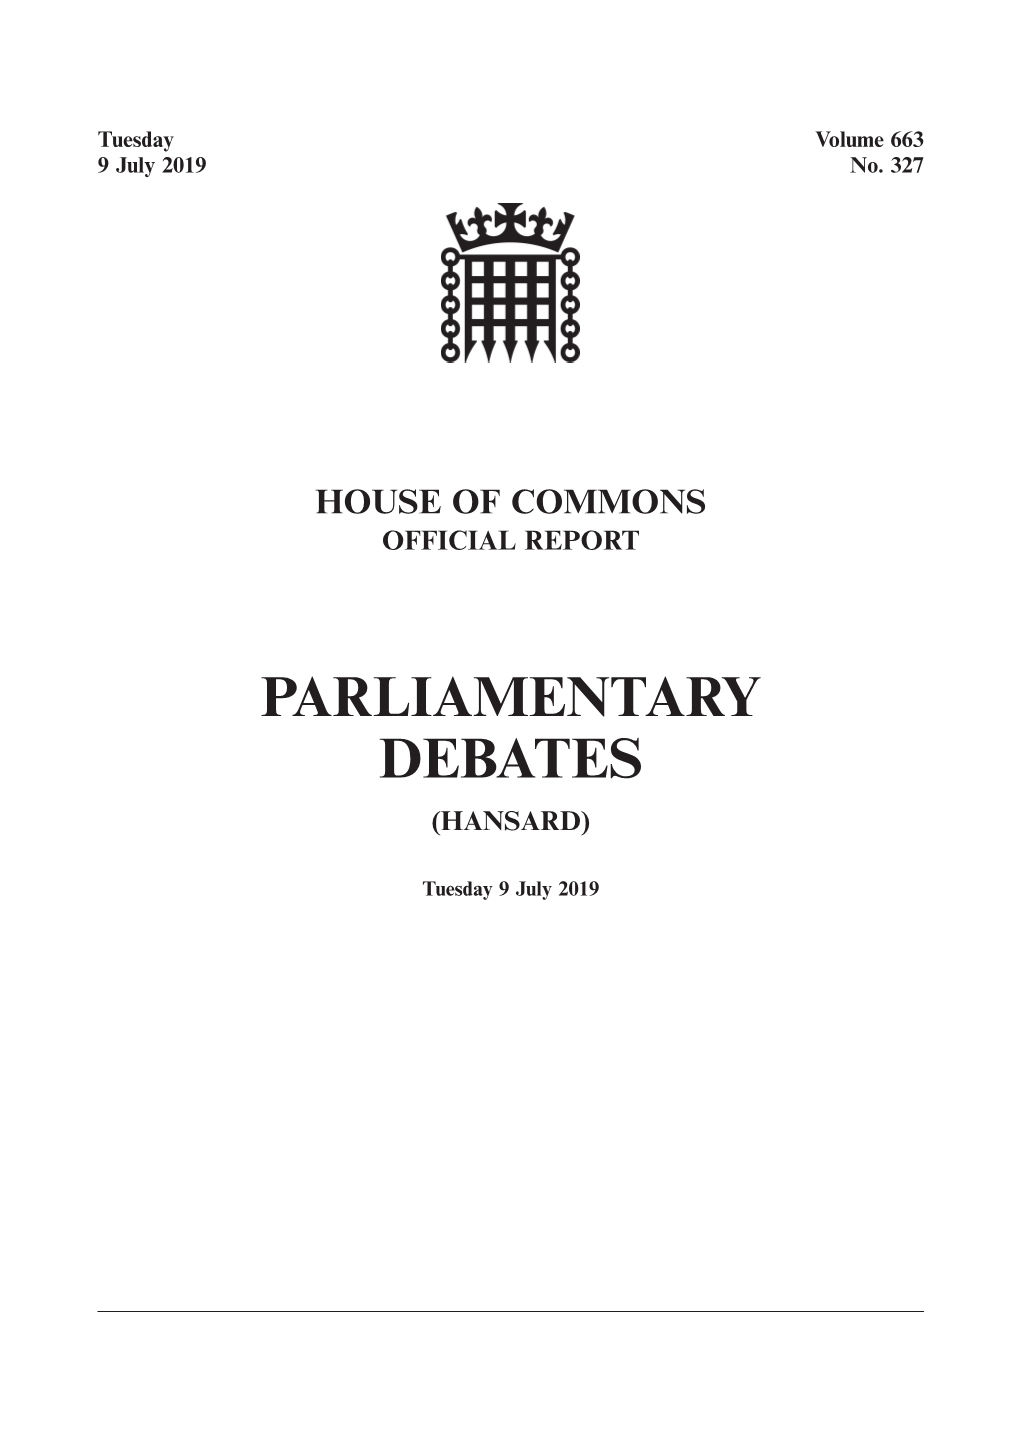 Whole Day Download the Hansard Record of the Entire Day in PDF Format. PDF File, 1.27